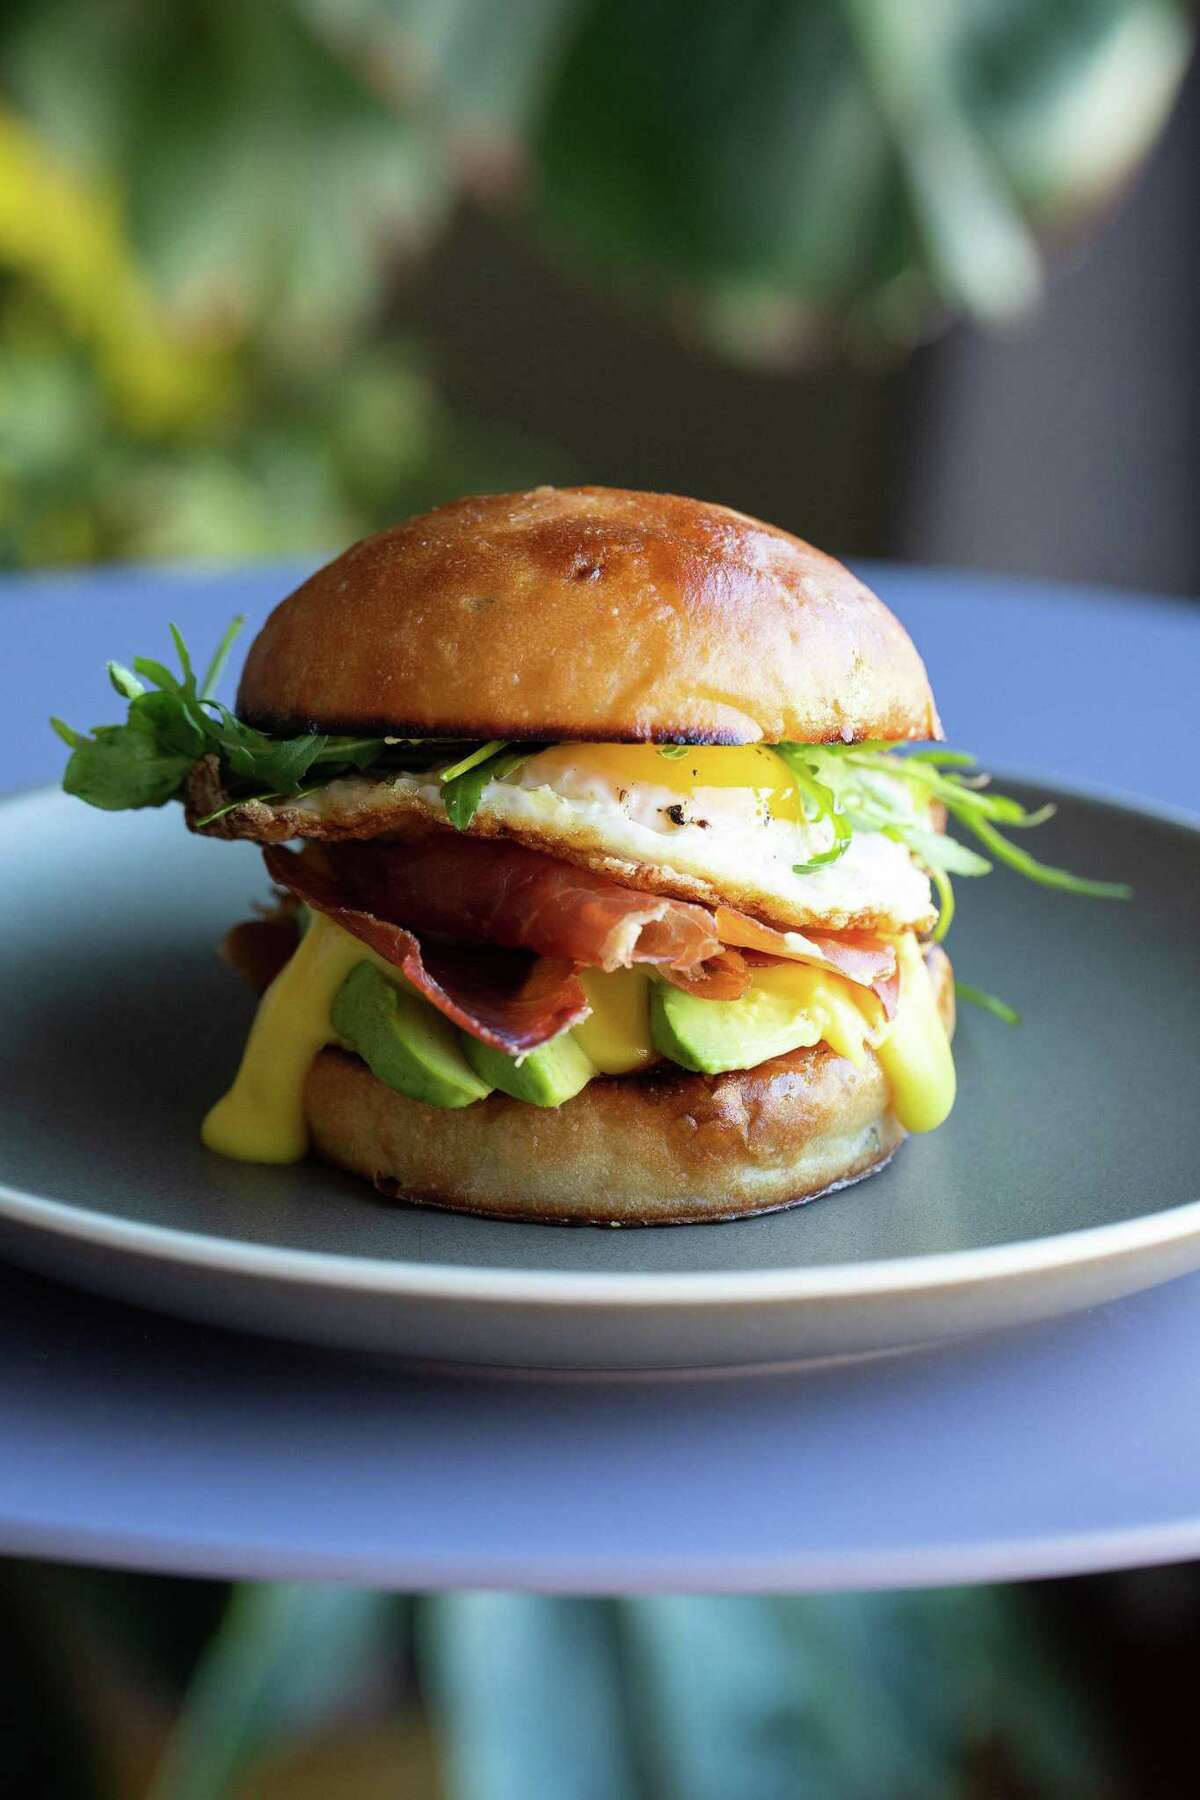 A breakfast sandwich with prosciutto, egg and avocado from Poppy.